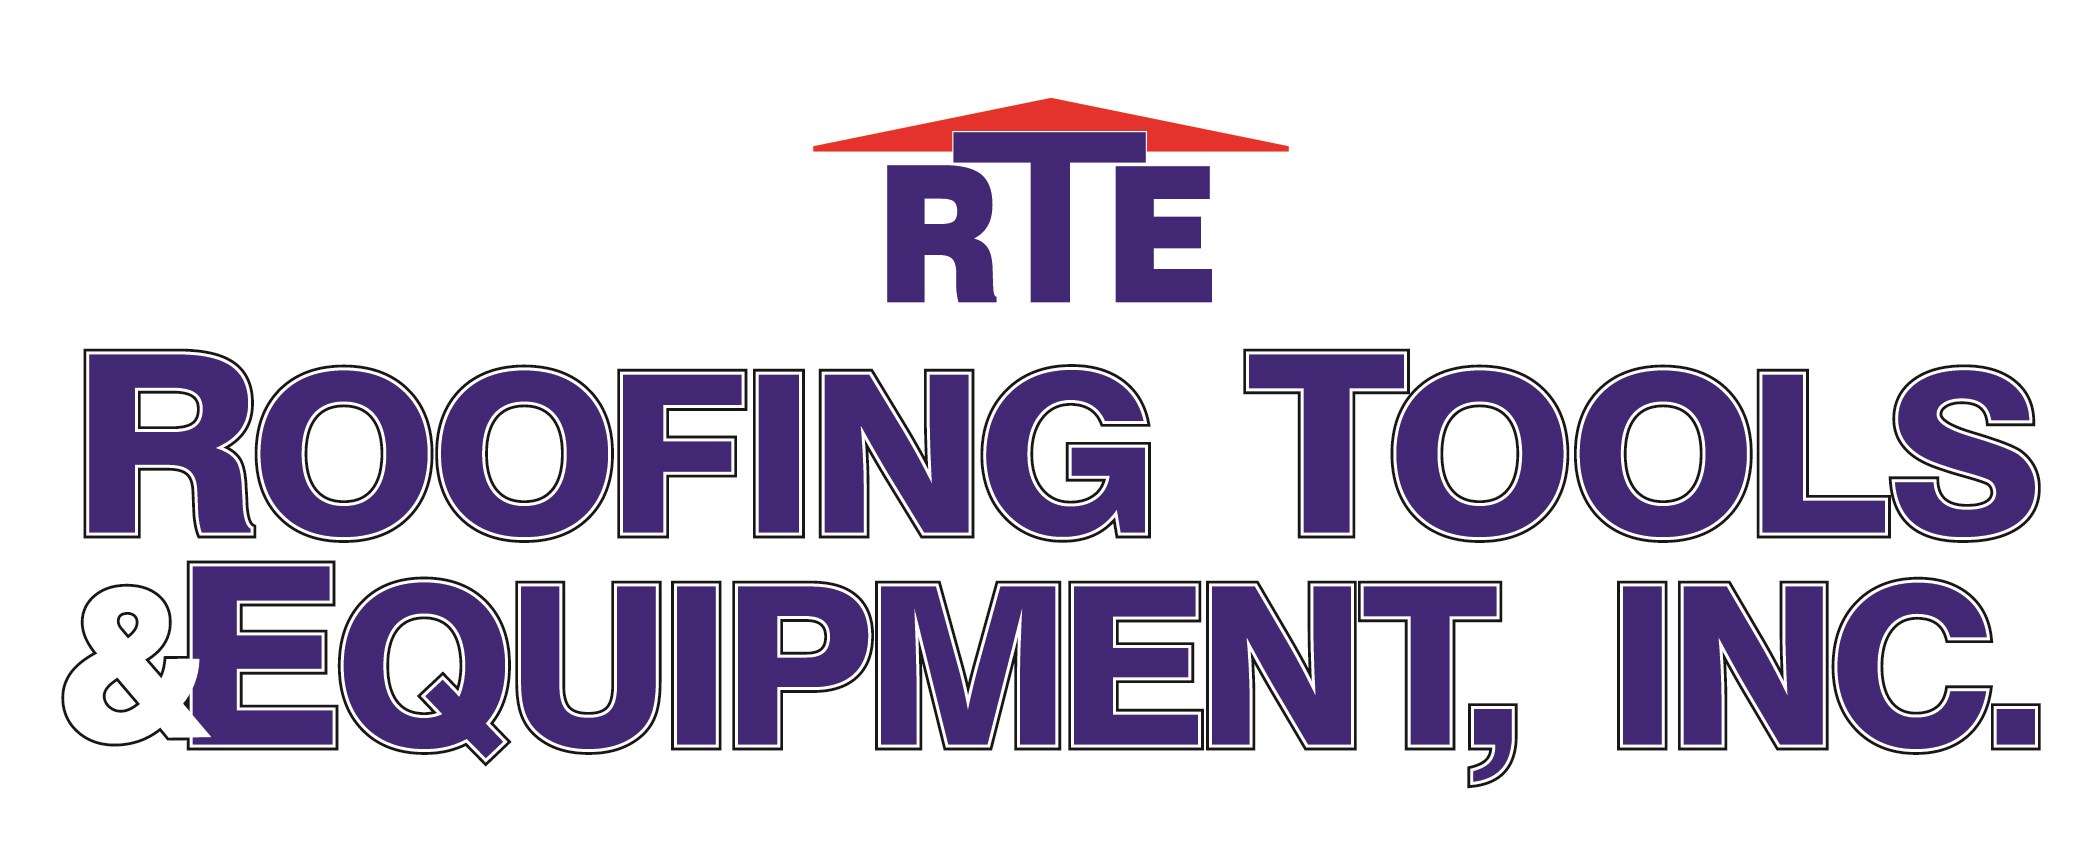 Roofing Tools and Equipment Company Logo